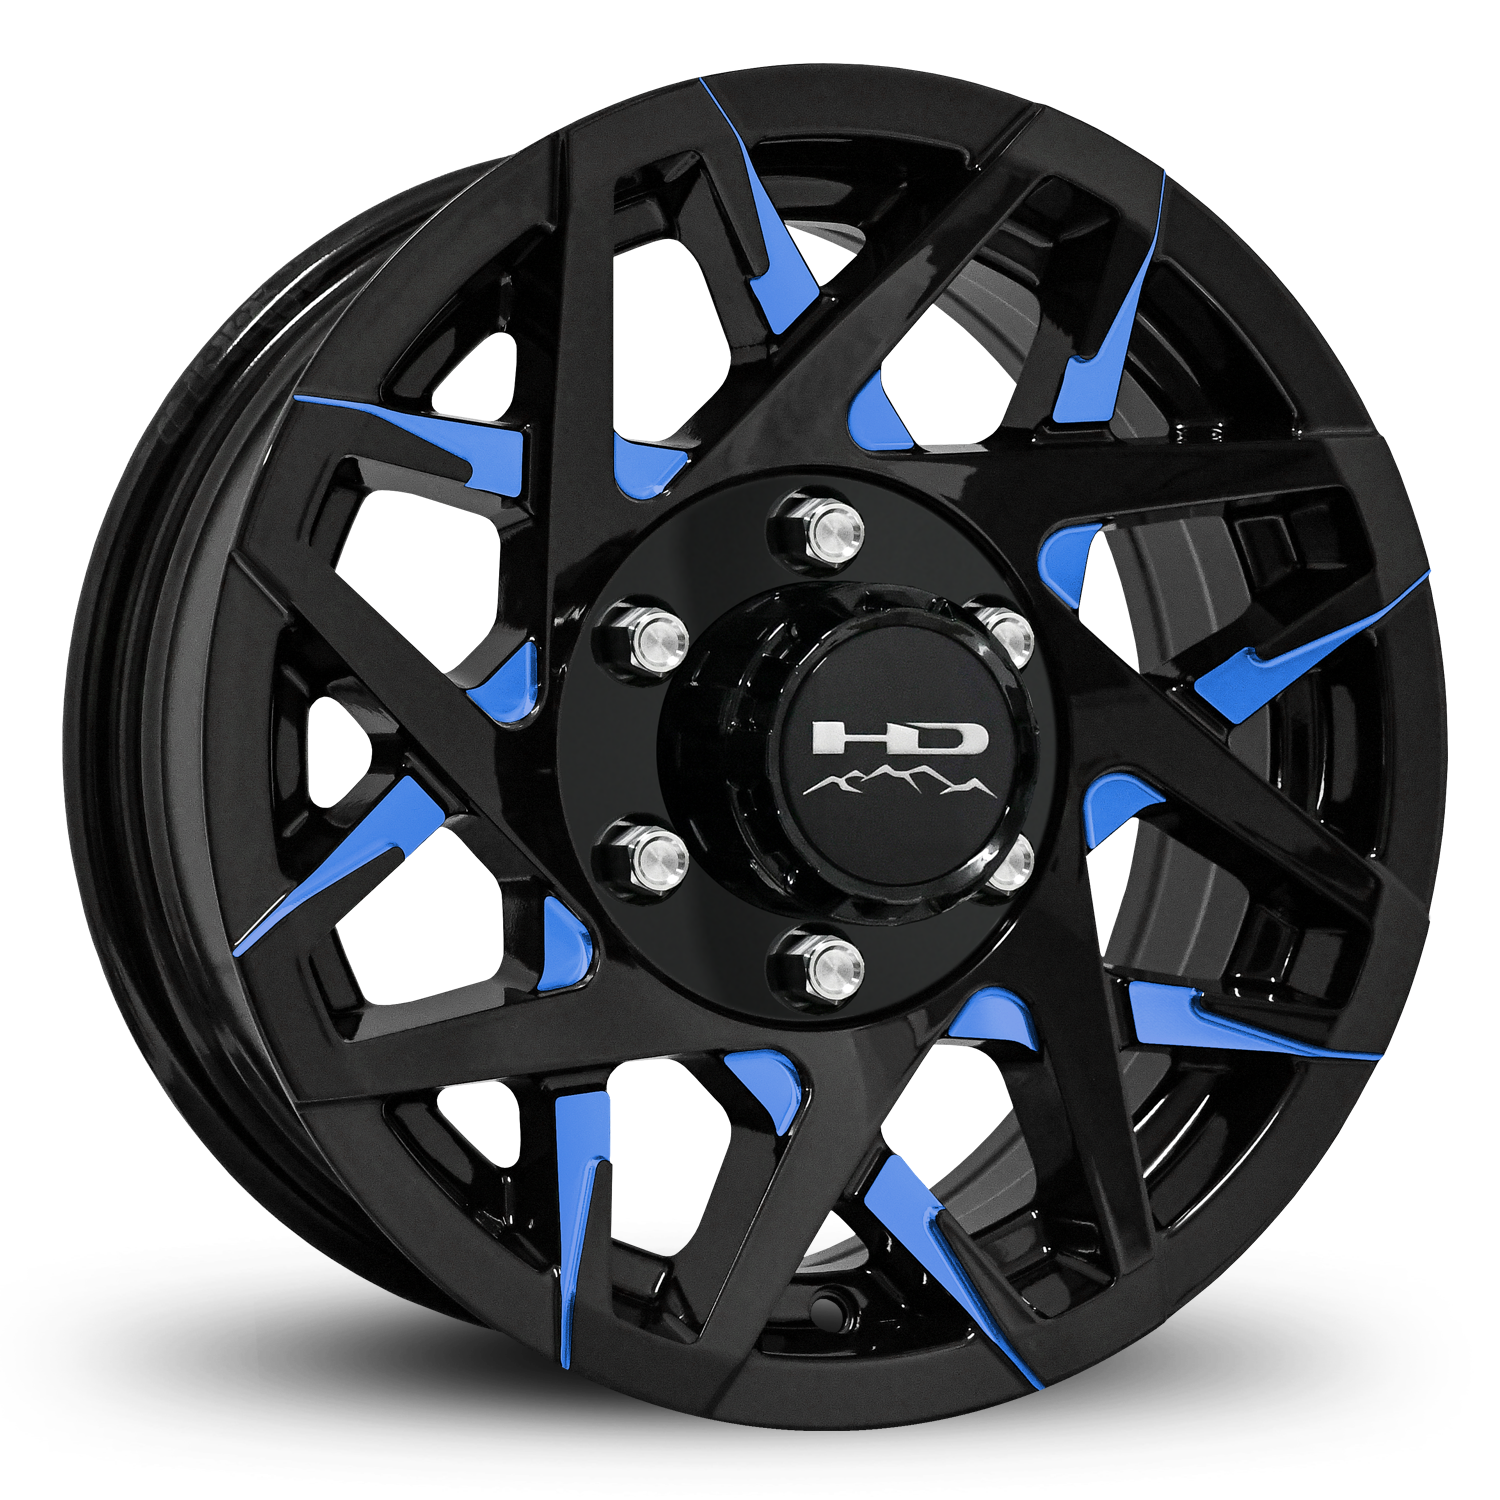 HD Off-Road Canyon Custom Trailer Wheel Rims in 15x6.0  15x6 Gloss Black CNC Milled Face with Blue Clear Coat Spokes with Center Cap & Logo fits 6x5.50 / 6x139.7 Axle Boat, Car, RV, Travel, Concession, Horse, Utility, Lawn & Garden, & Landscaping.